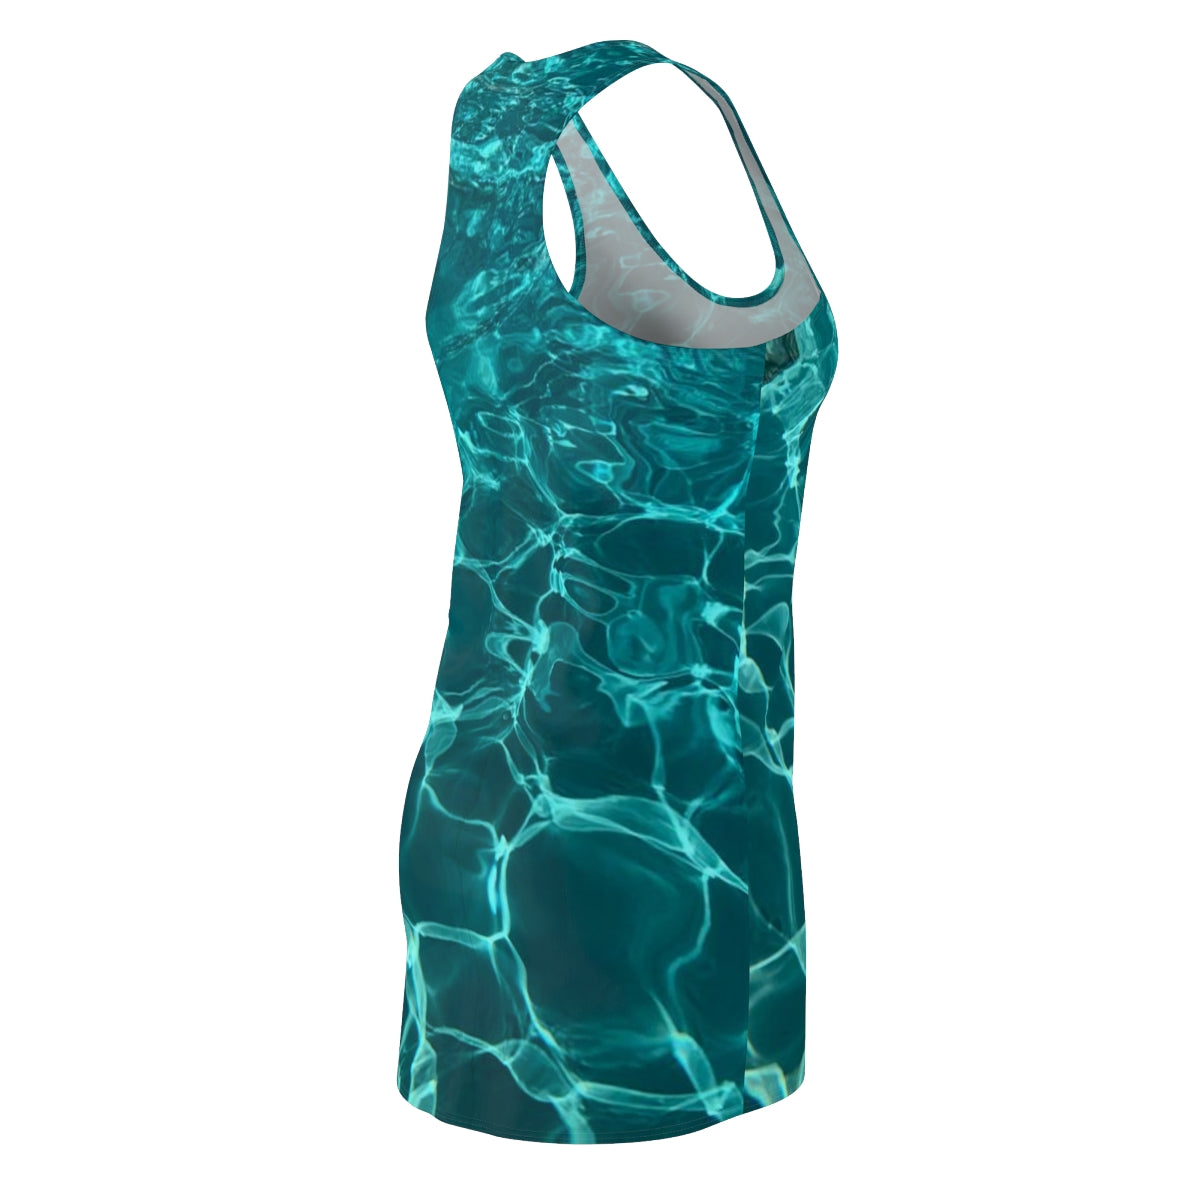 Women's Cut & Sew Racerback Dress with Turquoise color design